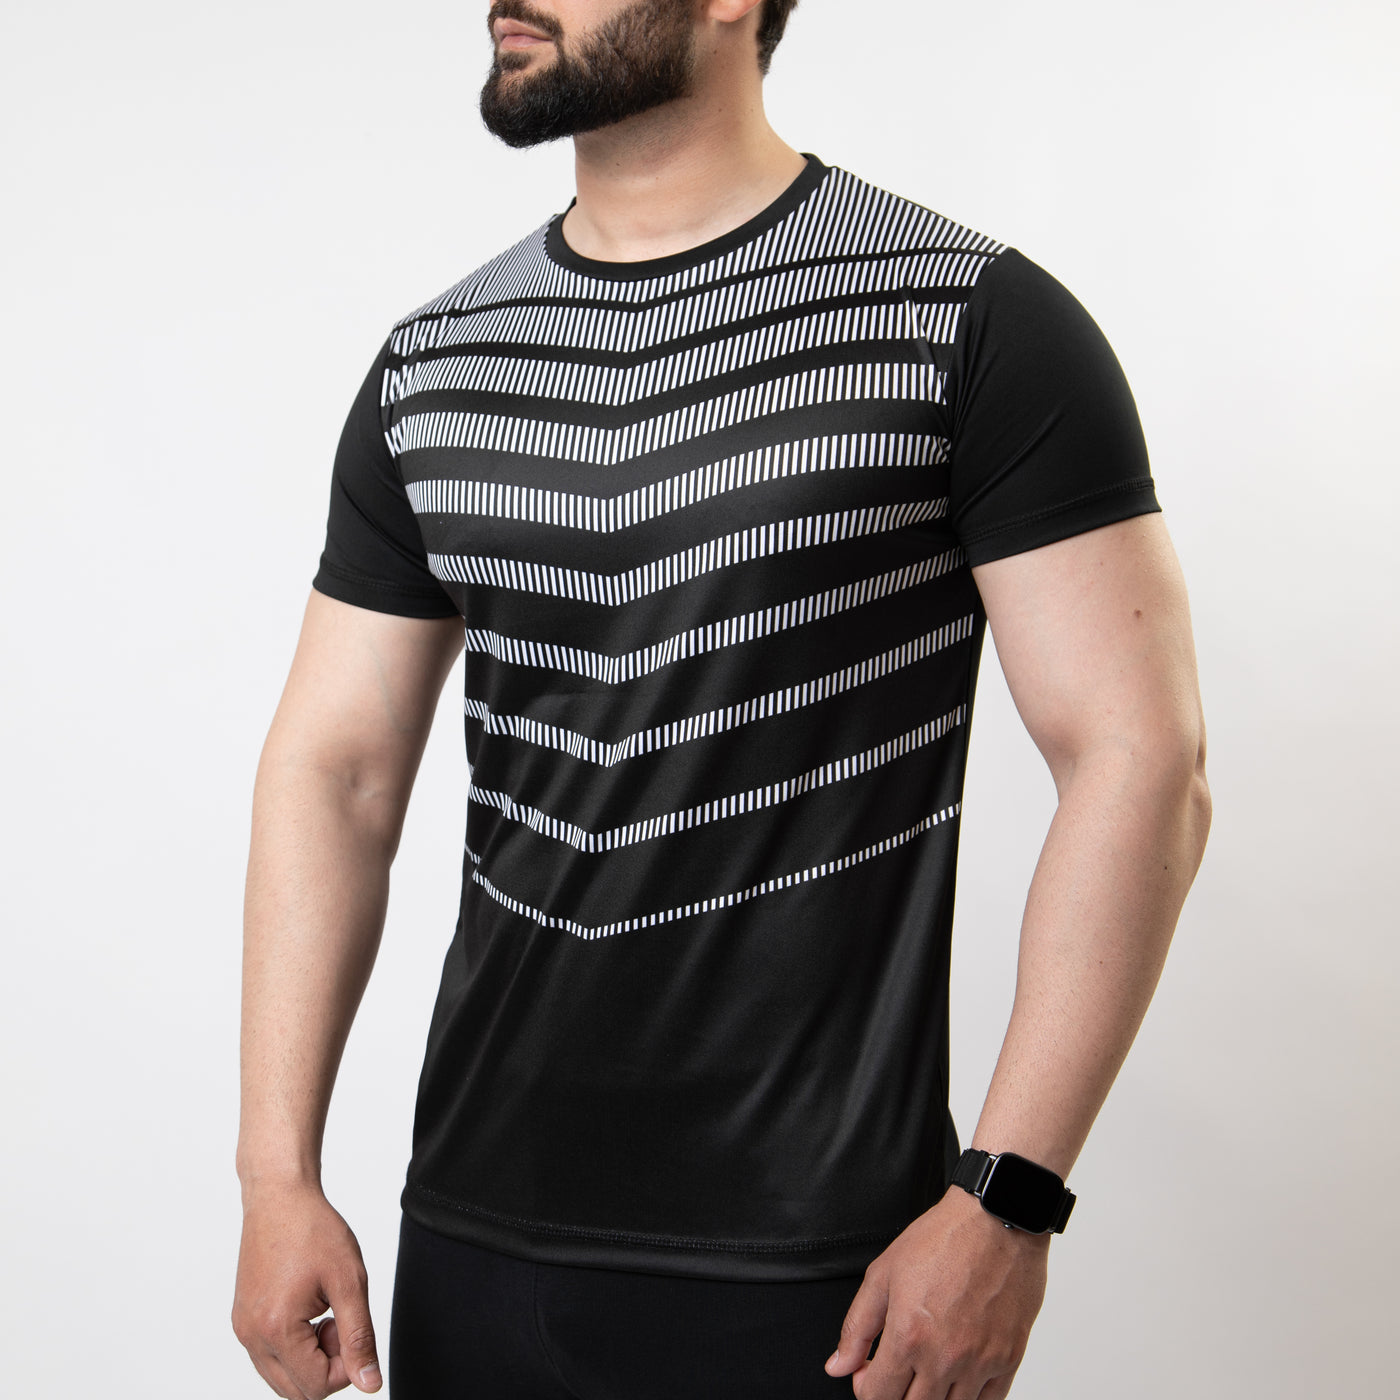 Black Sublimated Quick Dry T-Shirt with White Armor Stripes